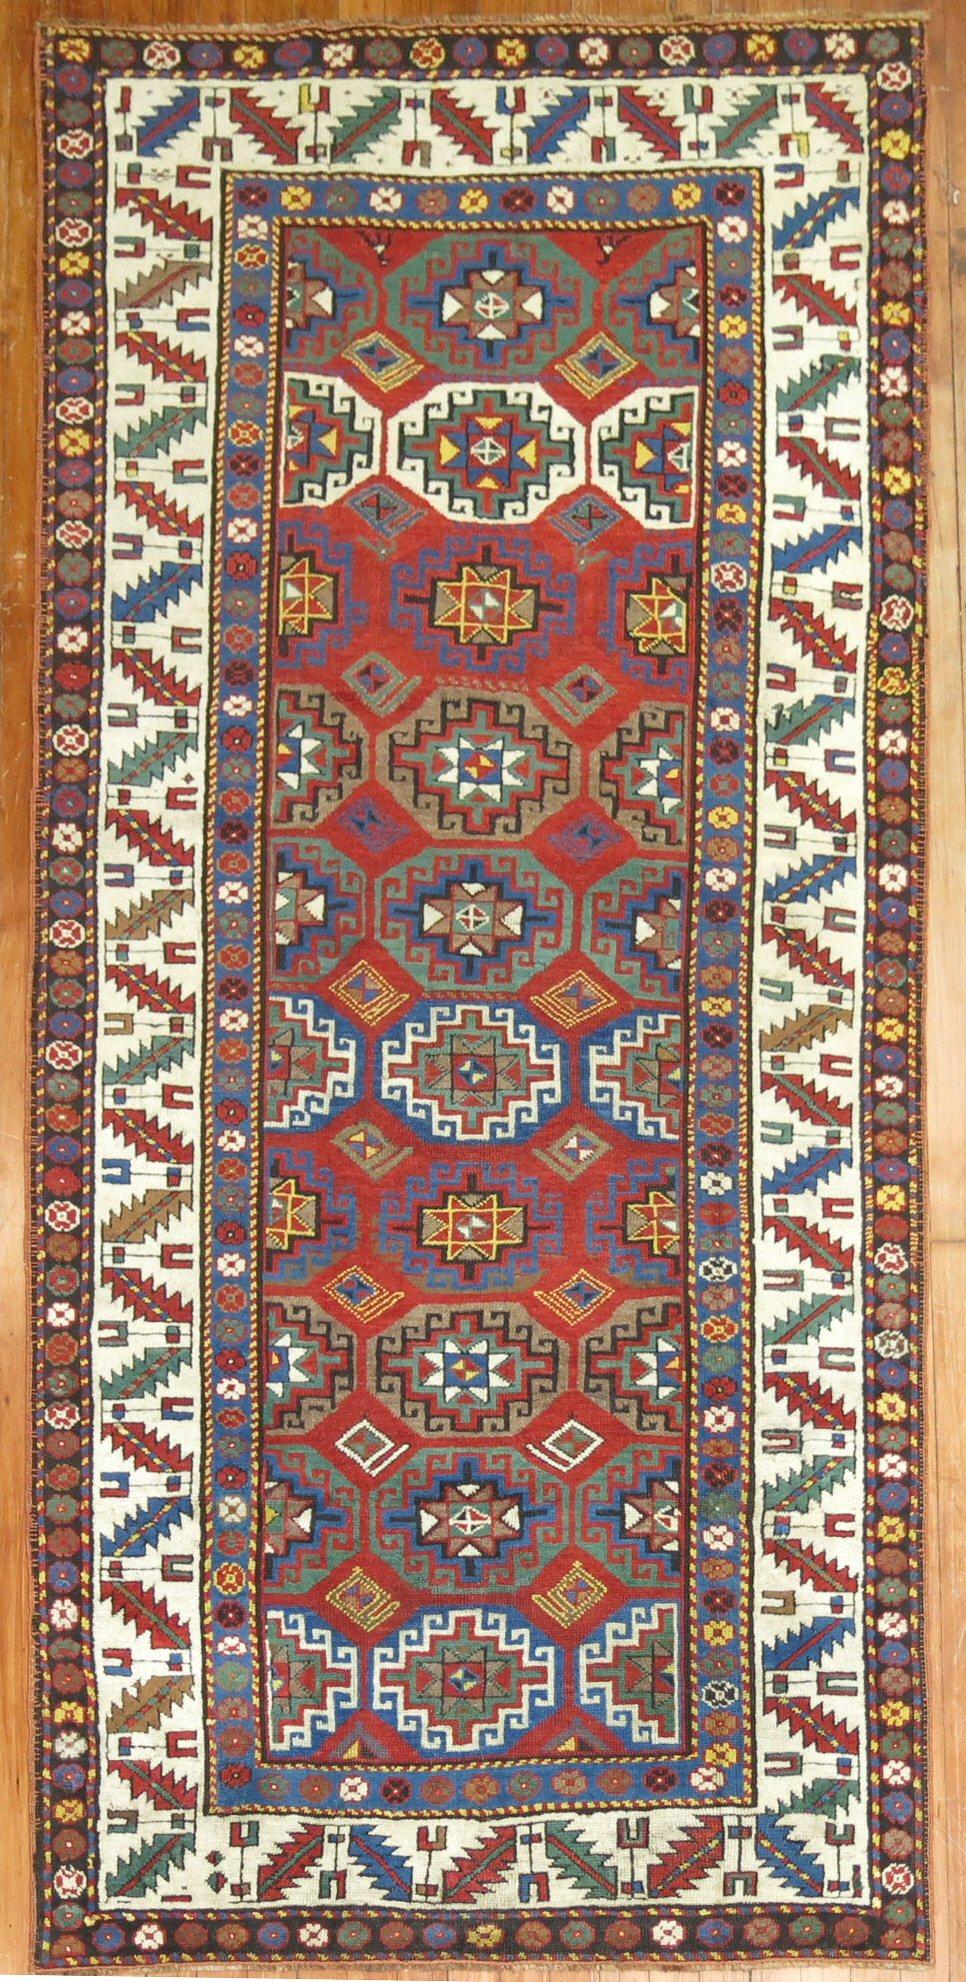 An early 20th century Kazak Moghan small Runner

Details
rug no.	8986
size	3' 6